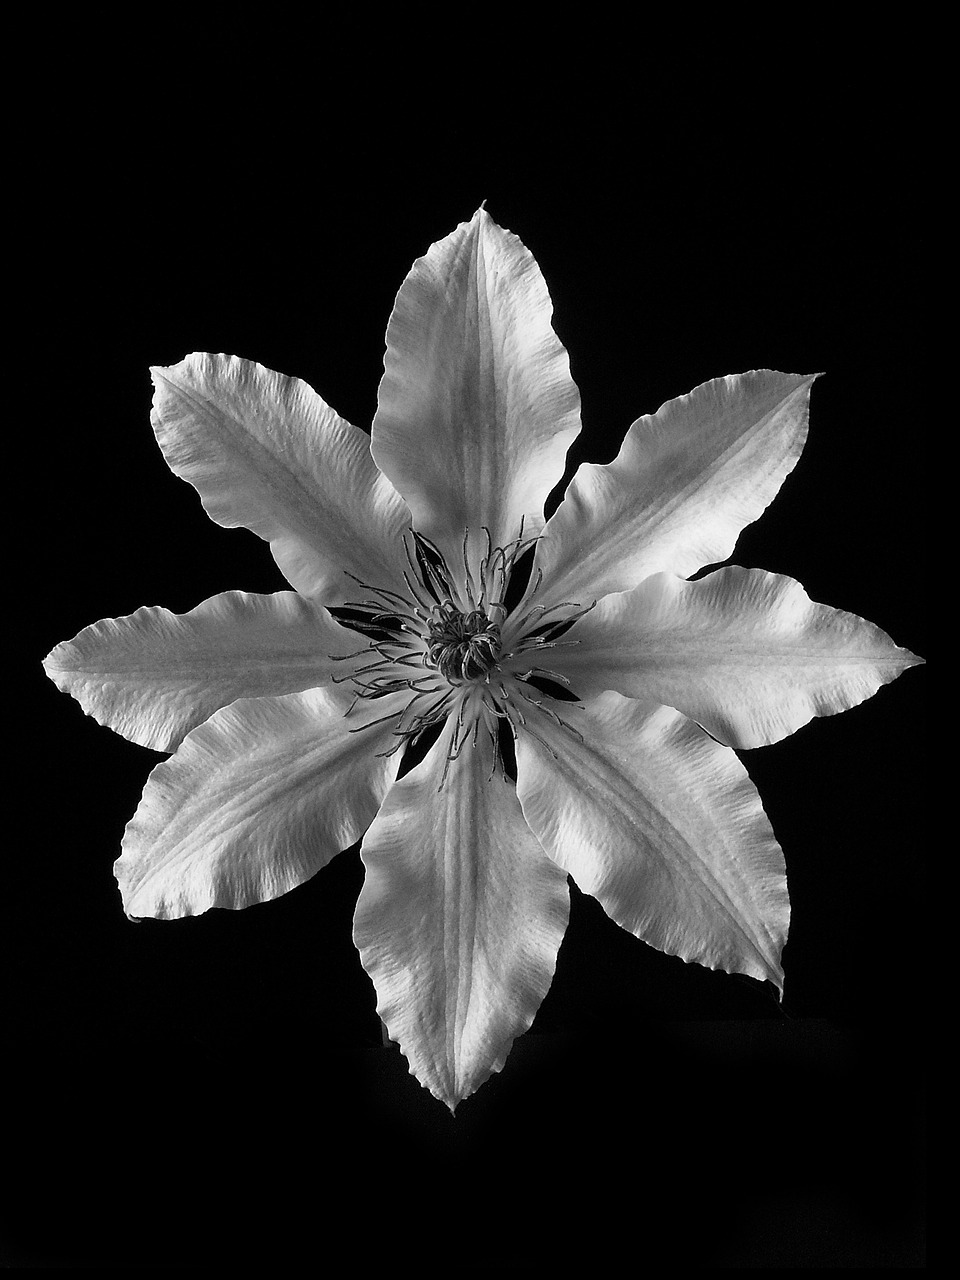 clematis flower black and white free photo